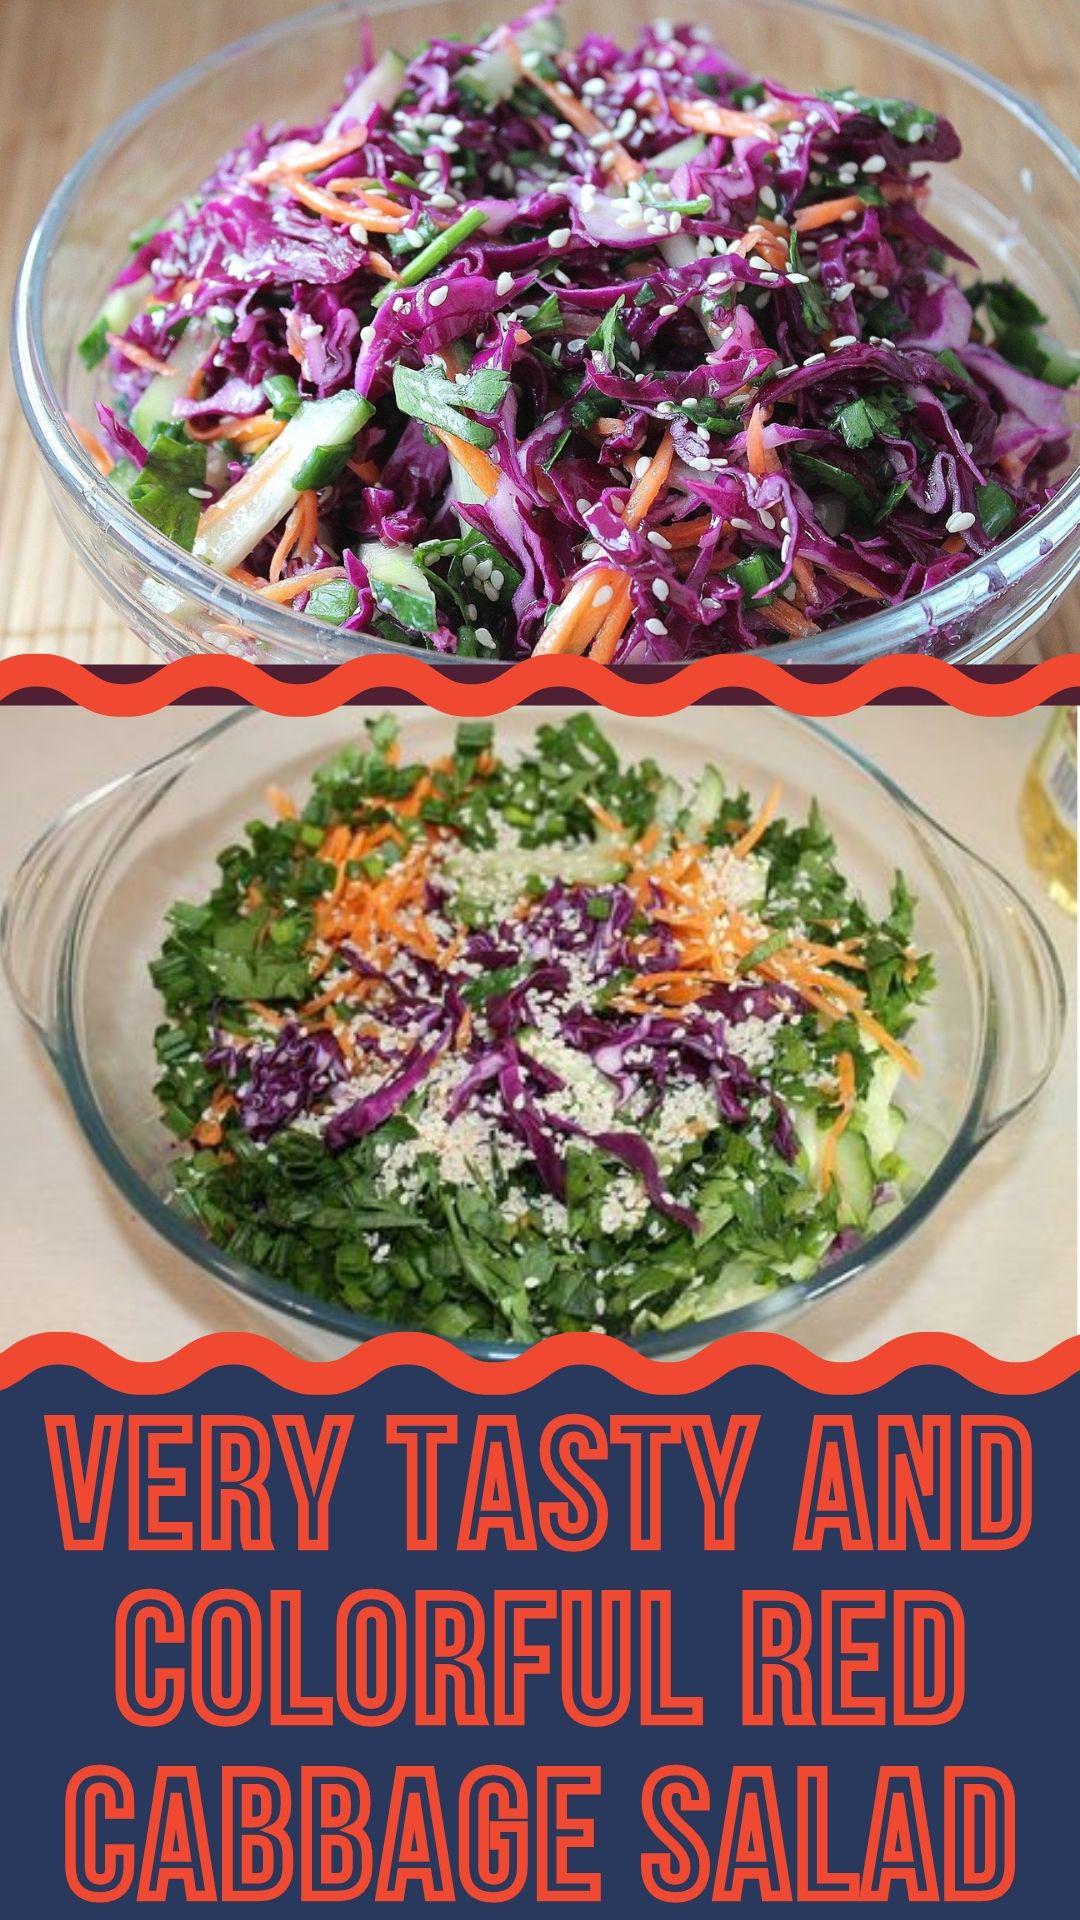 Very tasty and colorful red cabbage salad